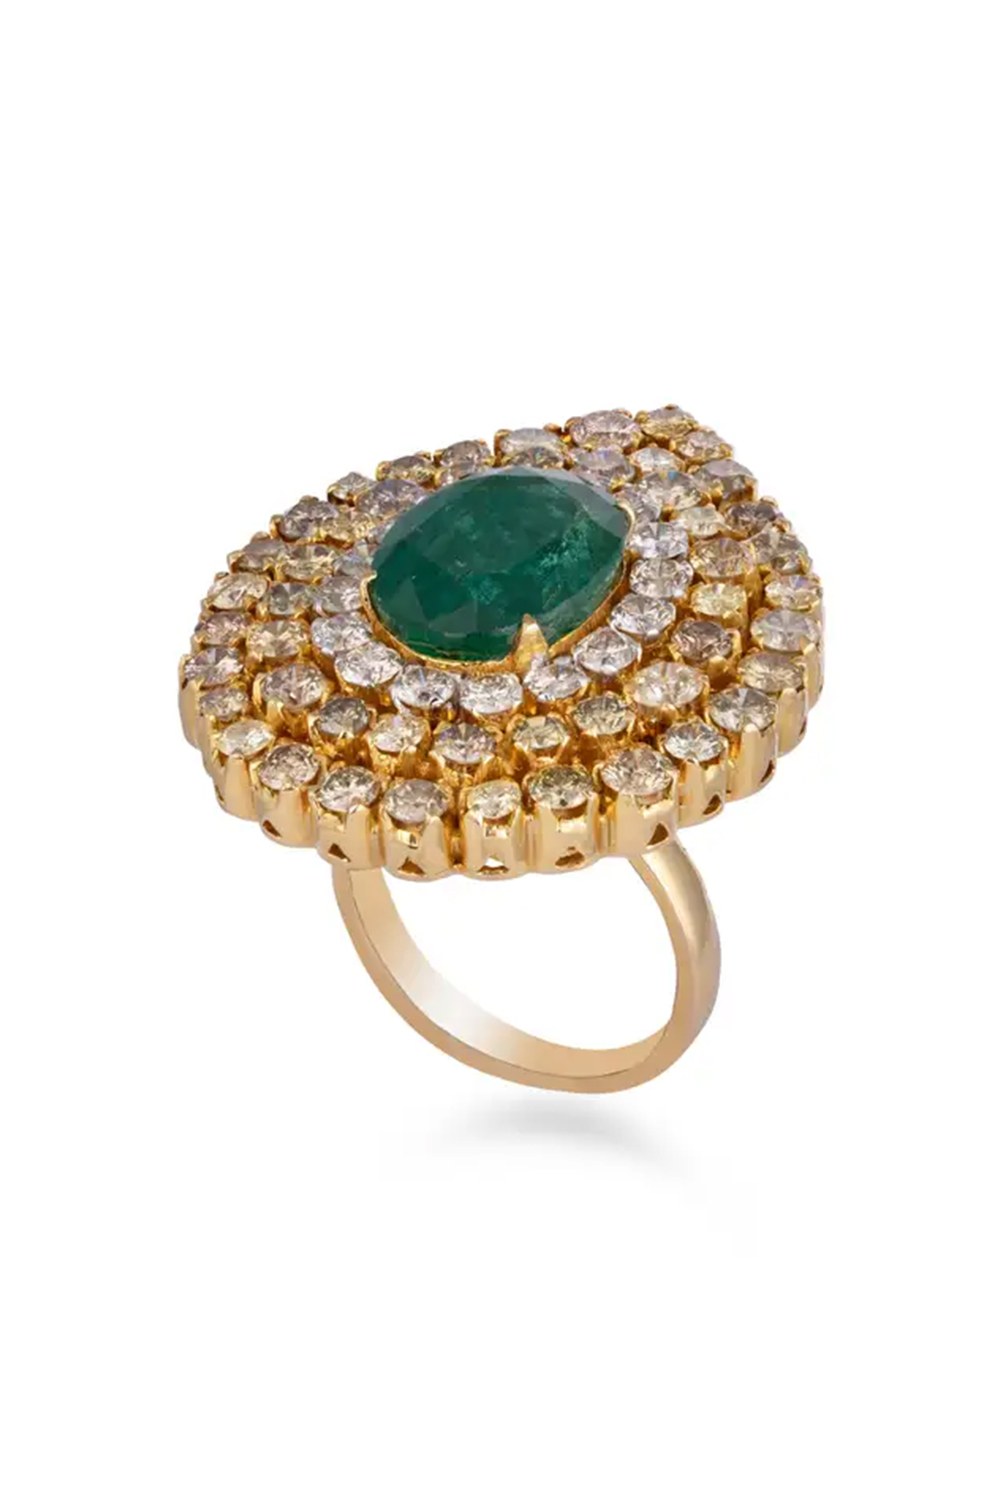 5.64cts Diamond & 7.47cts Emerald gold ring